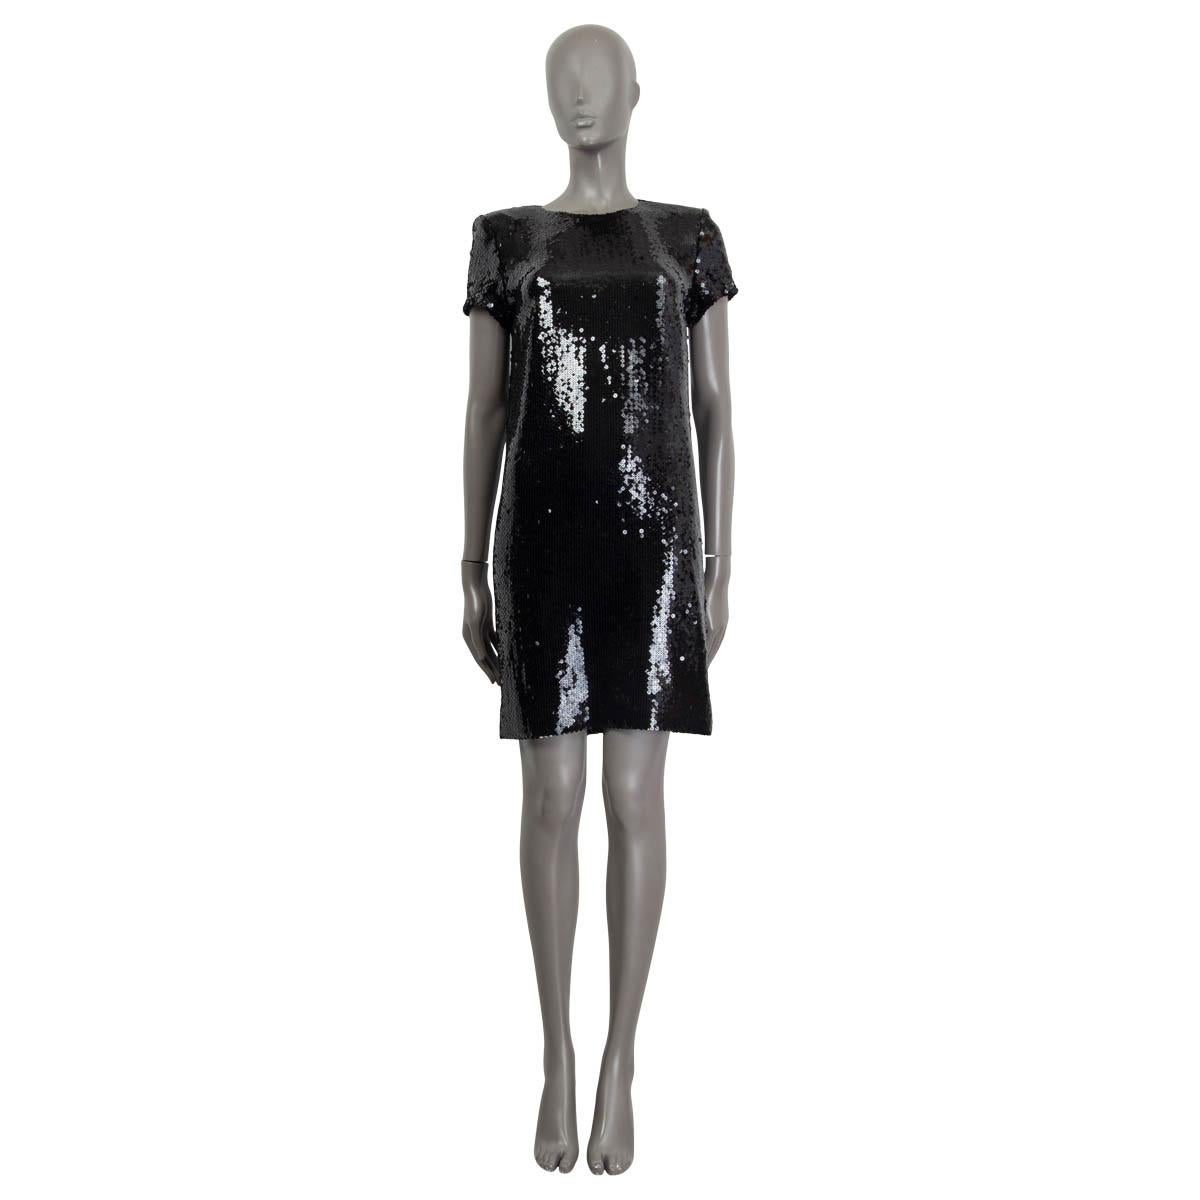 100% authentic Chanel 2018 Hamburg sequin embellished short sleeve dress in black polyester (99%) and polyamide (1%). Features padded shoulders and a 'CC' emblem at the sleeve. Opens with a concealed zipper and a hook at the back. Lined in black